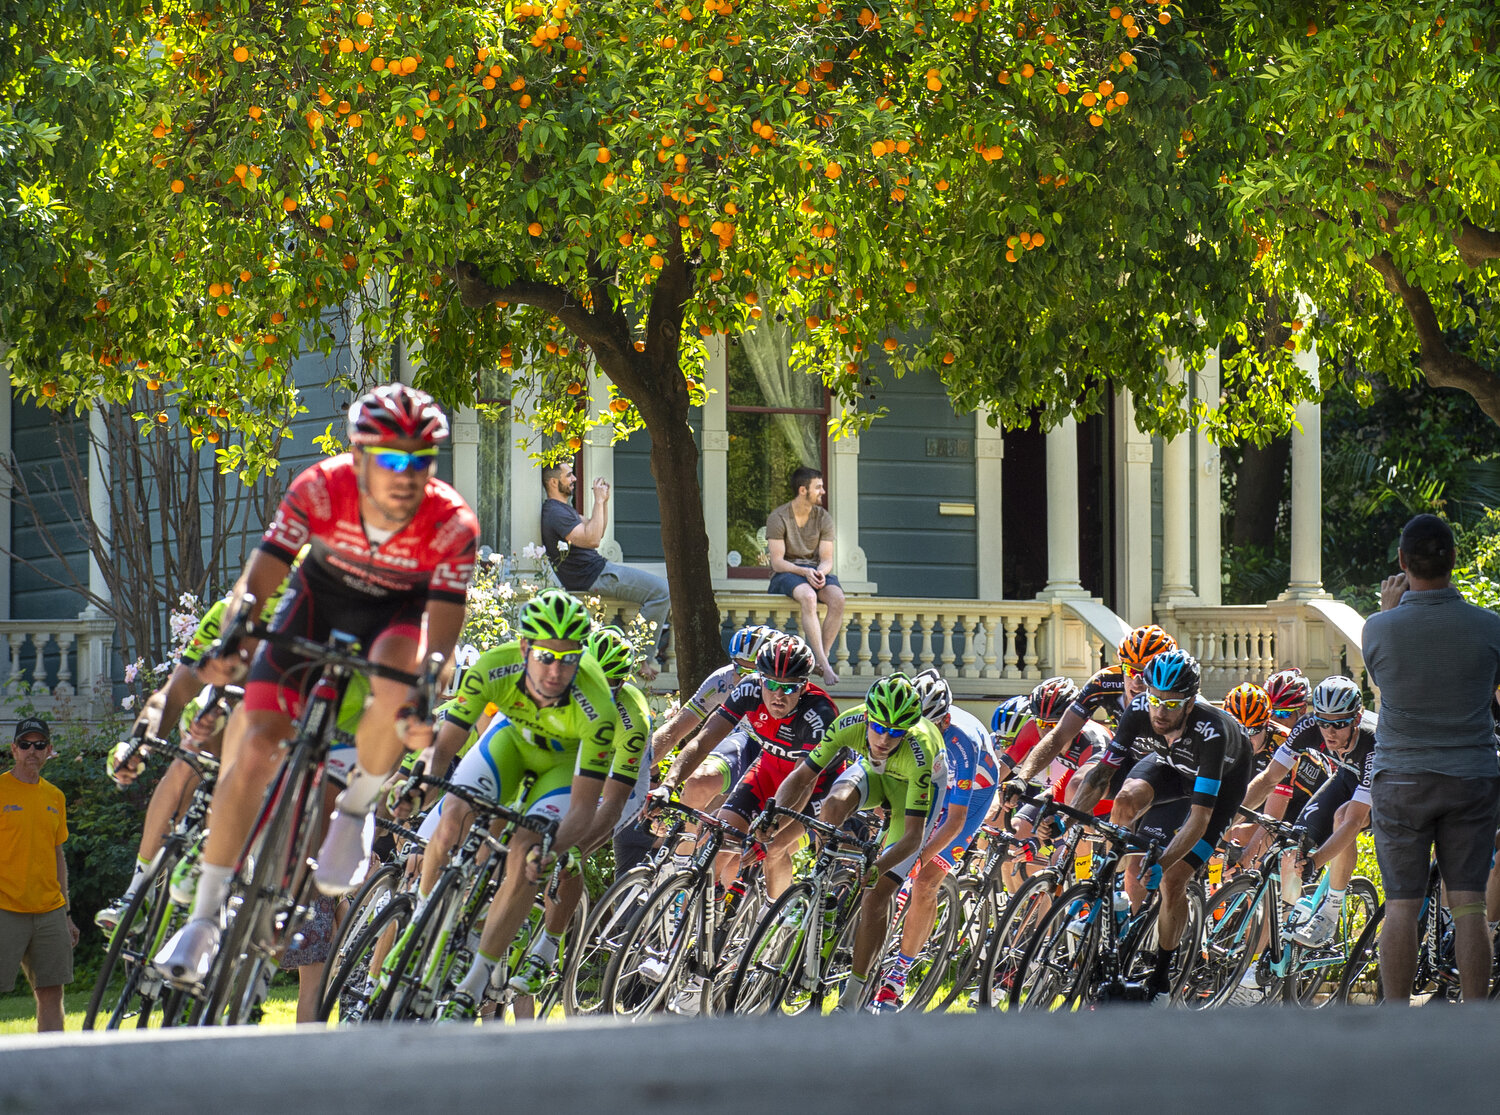  The peloton sweeps around the corner from P Street onto 18th Street during stage 1 of the Amgen Tour of California cycling event in Sacramento, Calif., Sunday, May 11, 2014. 